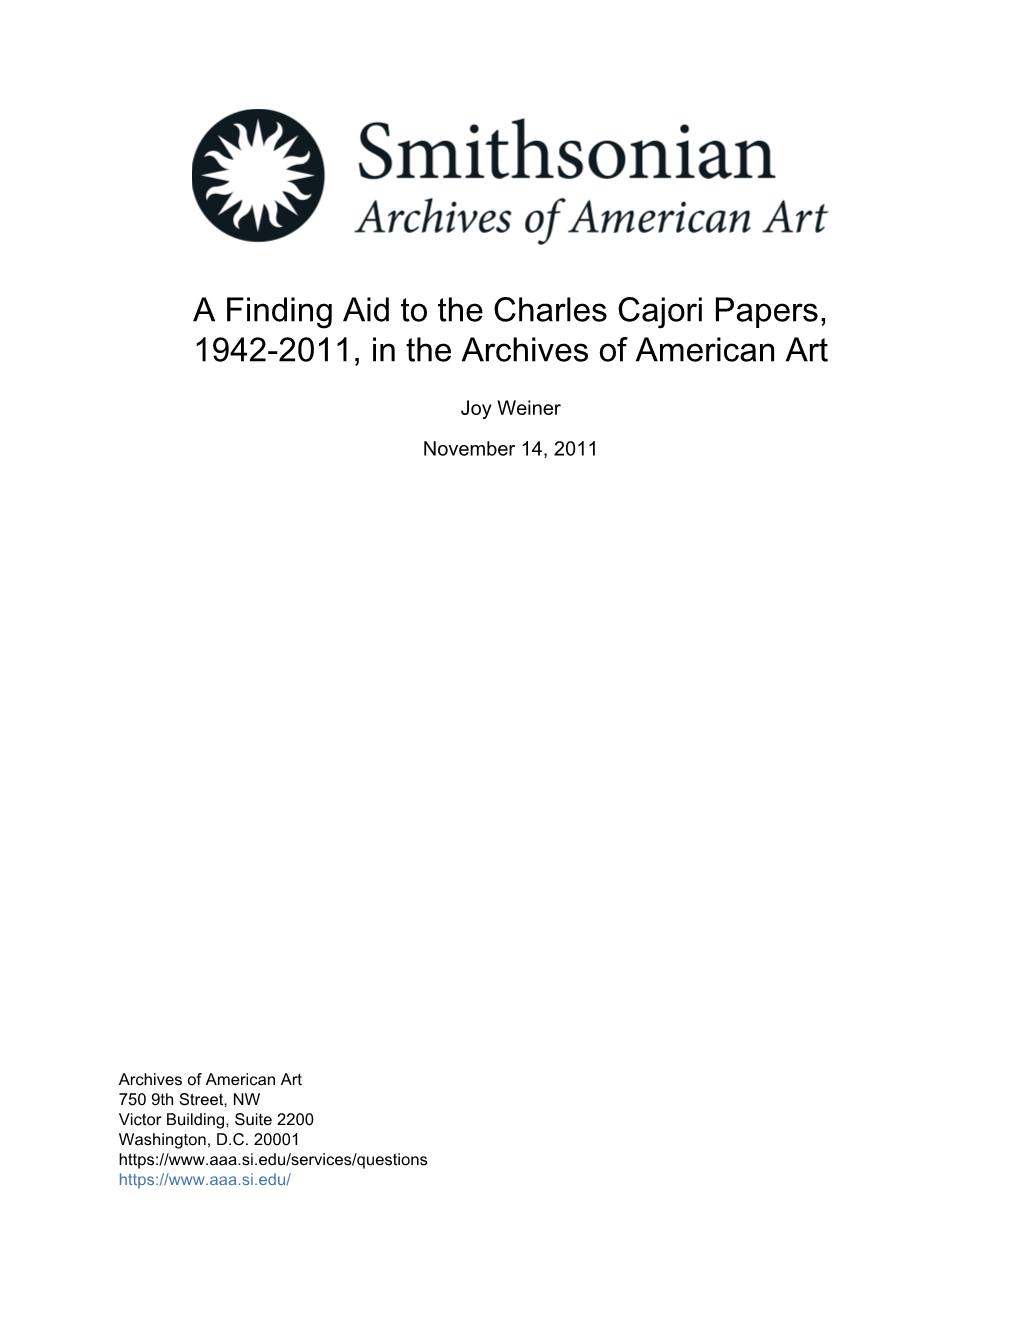 A Finding Aid to the Charles Cajori Papers, 1942-2011, in the Archives of American Art